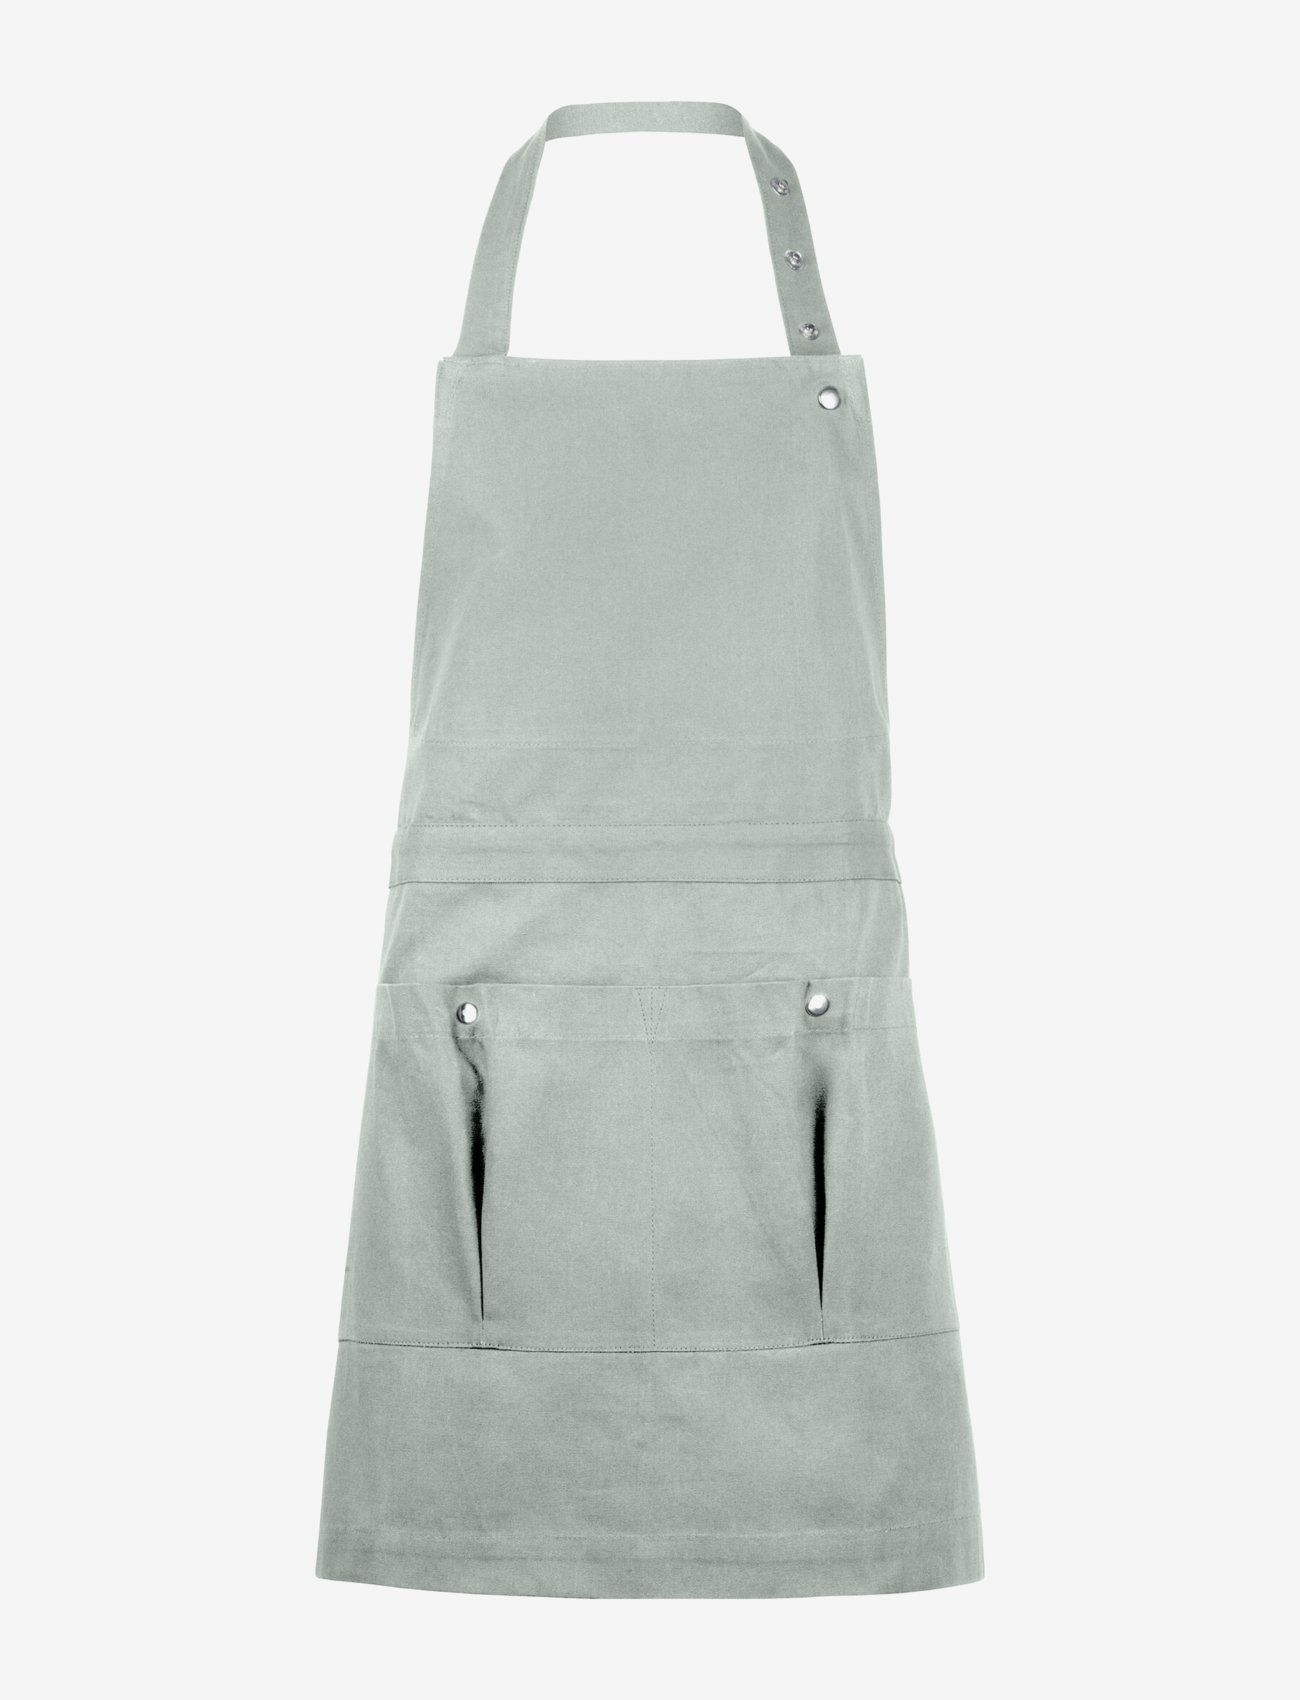 The Organic Company - Creative and Garden Apron - aprons - 410 dusty mint - 0